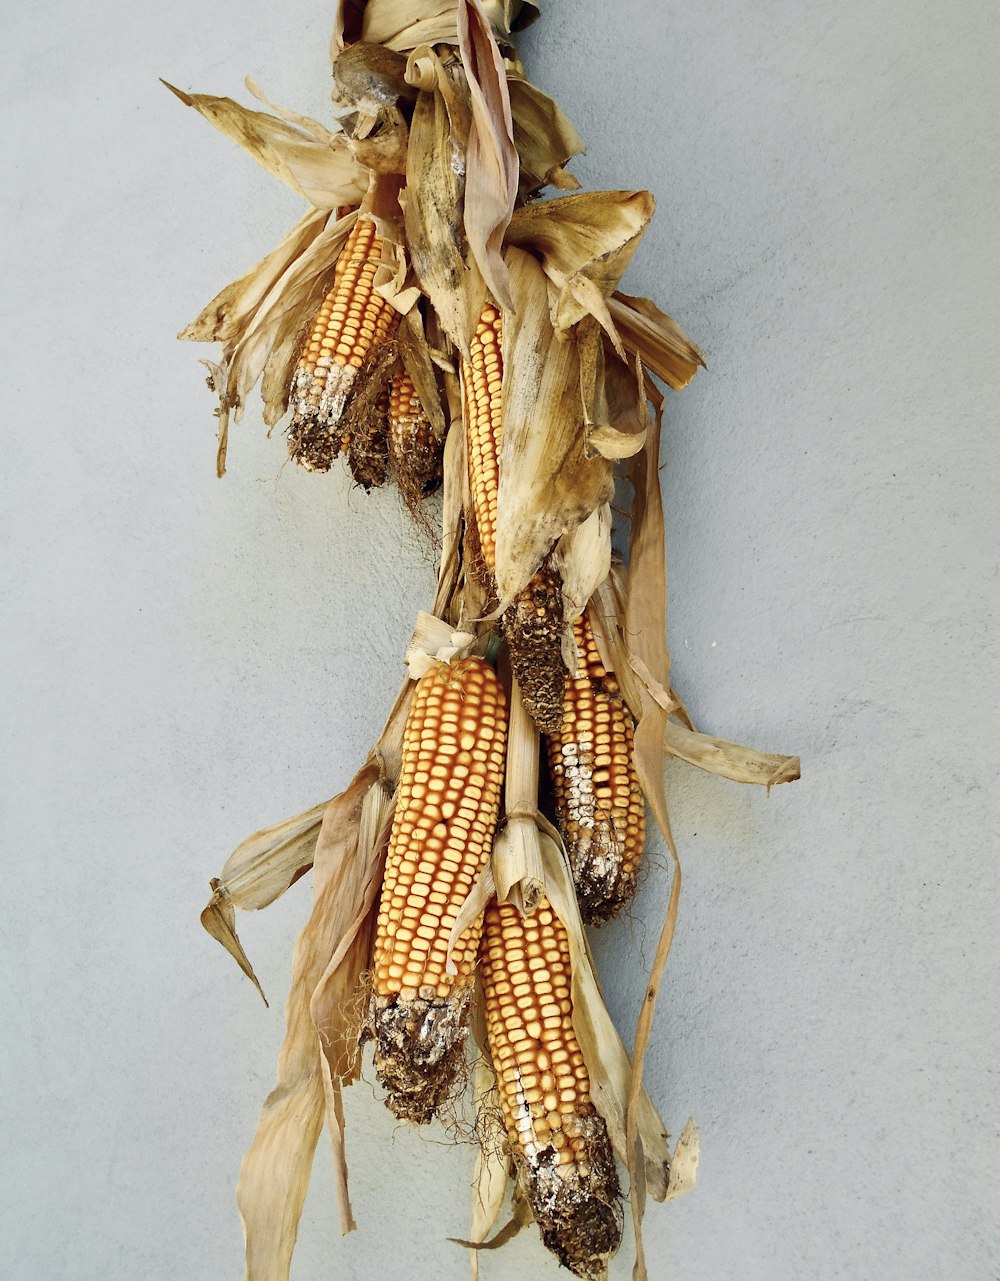 a corn cob hanging from the side of a wall